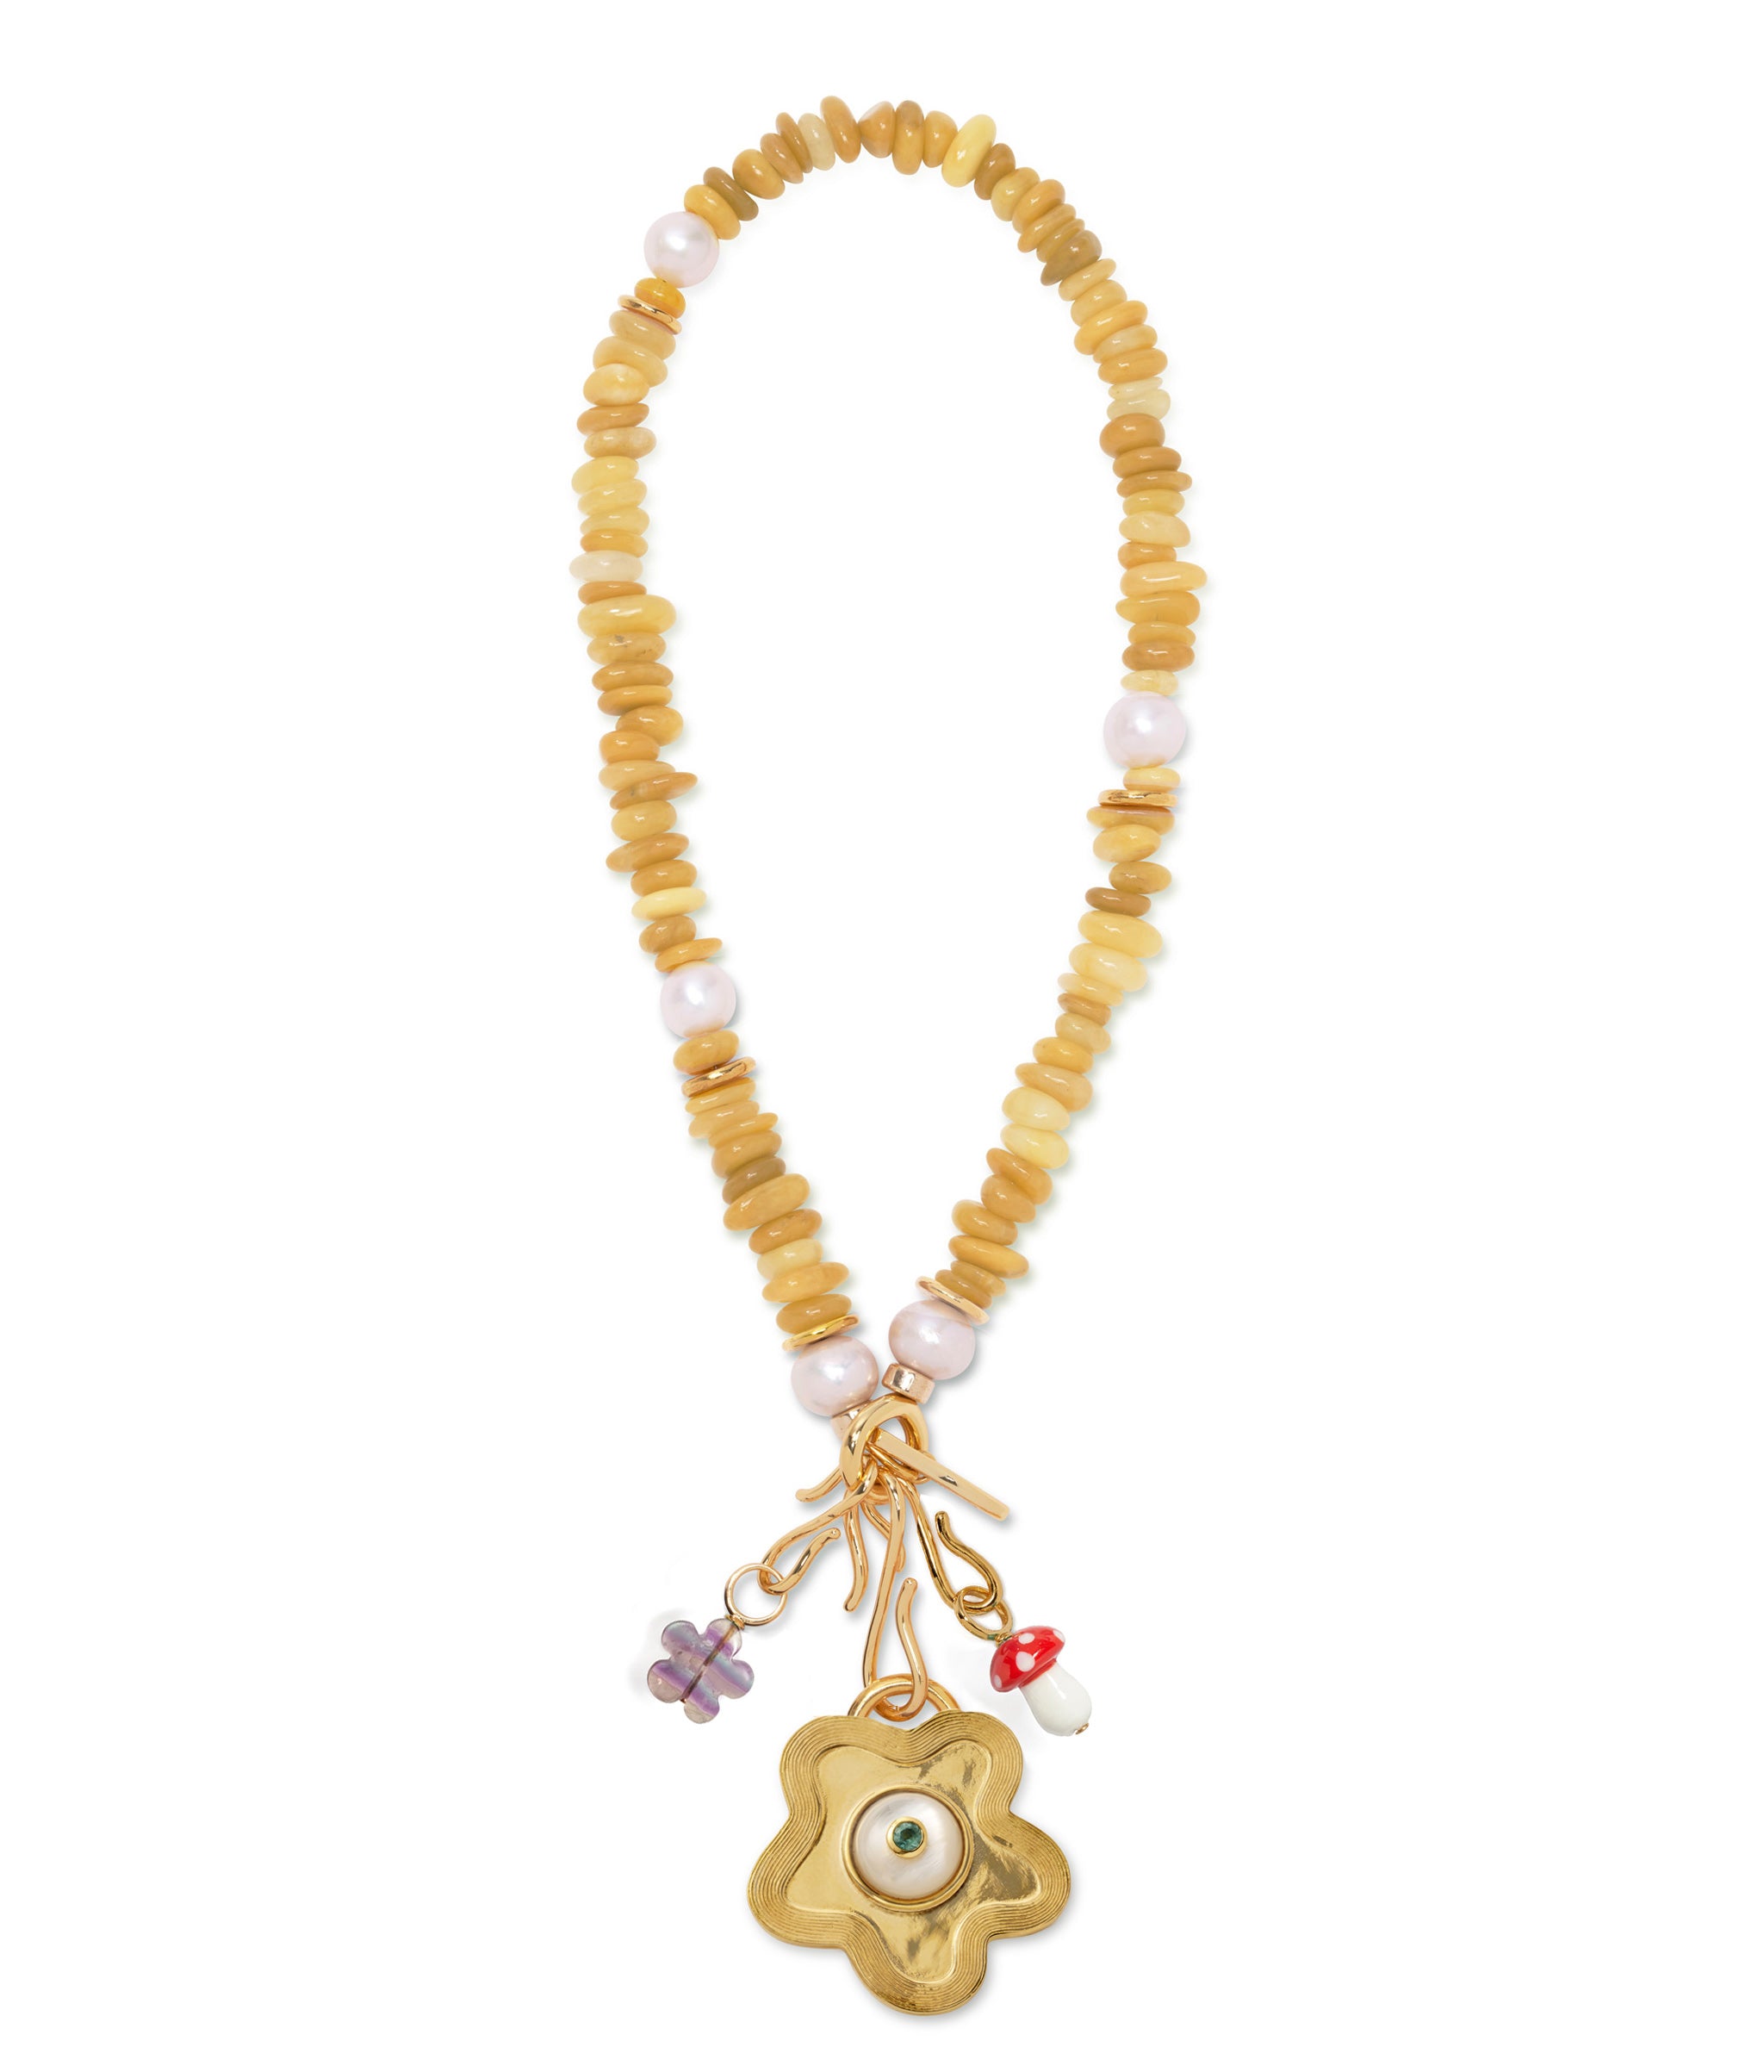 Mood Necklace in Yellow Jade with assorted charms.